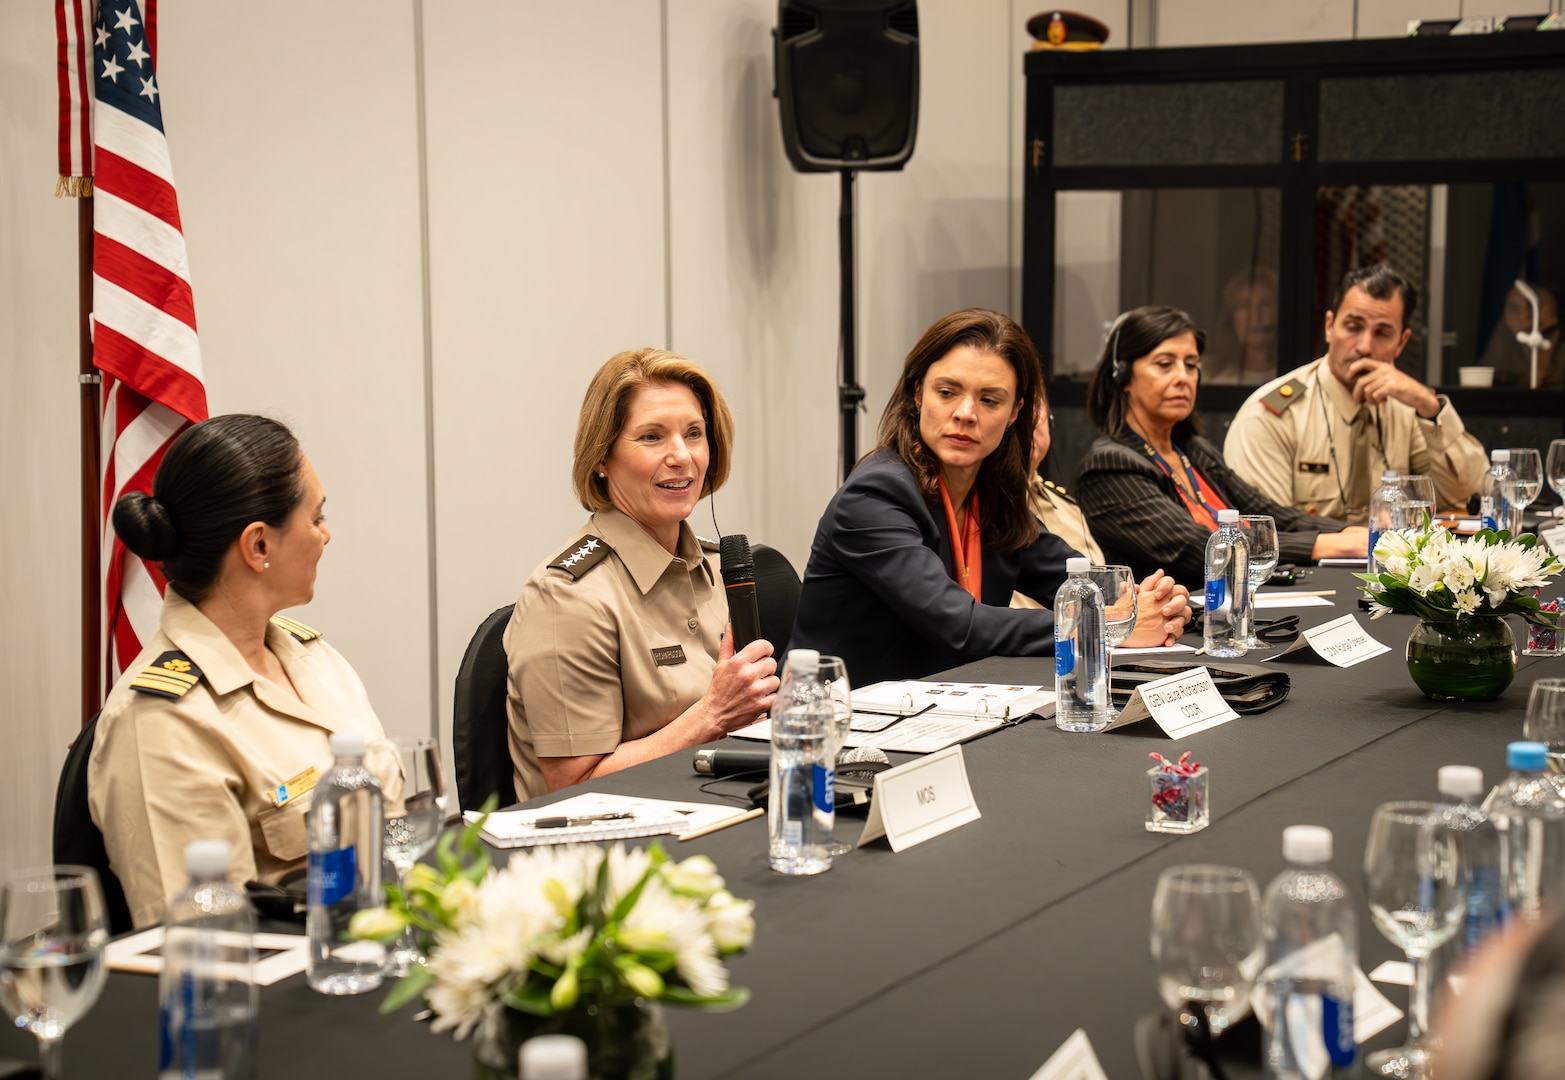 BUENOS AIRES, Argentina (April 3, 2024) – U.S. Army Gen. Laura Richardson, the commander of U.S. Southern Command (SOUTHCOM), joins Argentine service members and defense officials for a panel discussion on the advancement of Women, Peace, and Security.